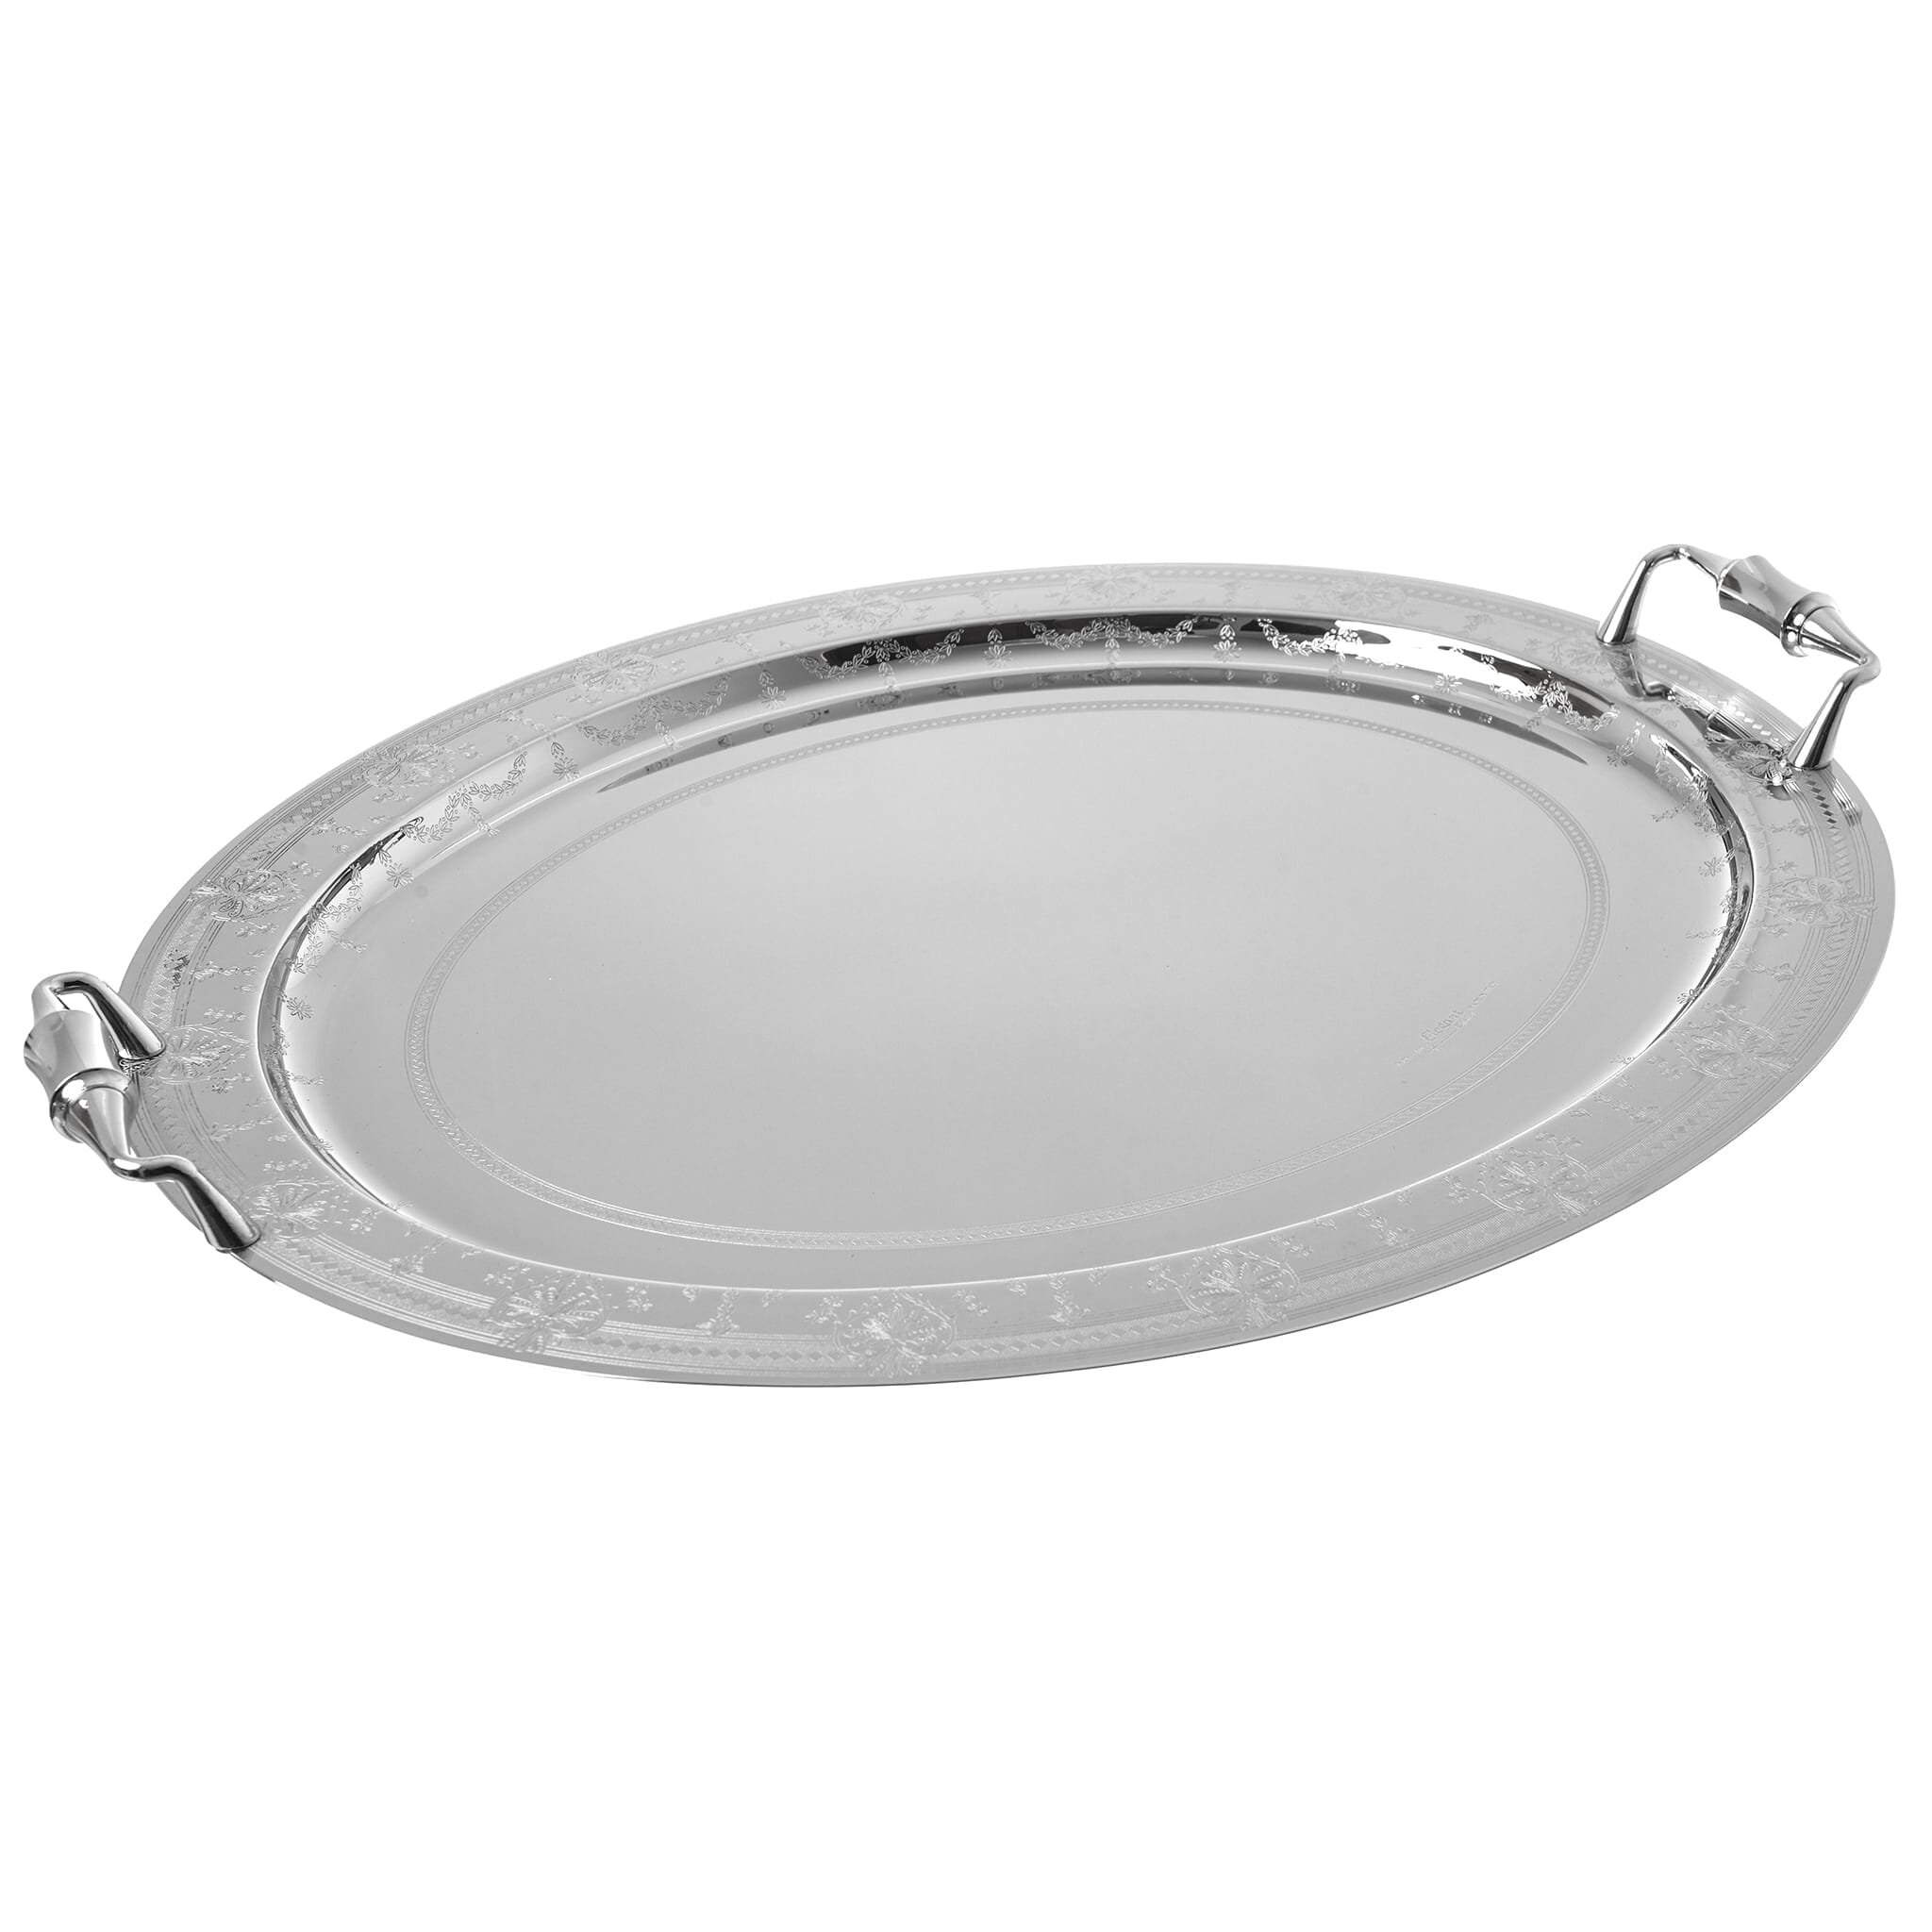 Elegant Gioiel - Oval Tray with Handles - Stainless Steel 18/10 - 52cm - 75000466